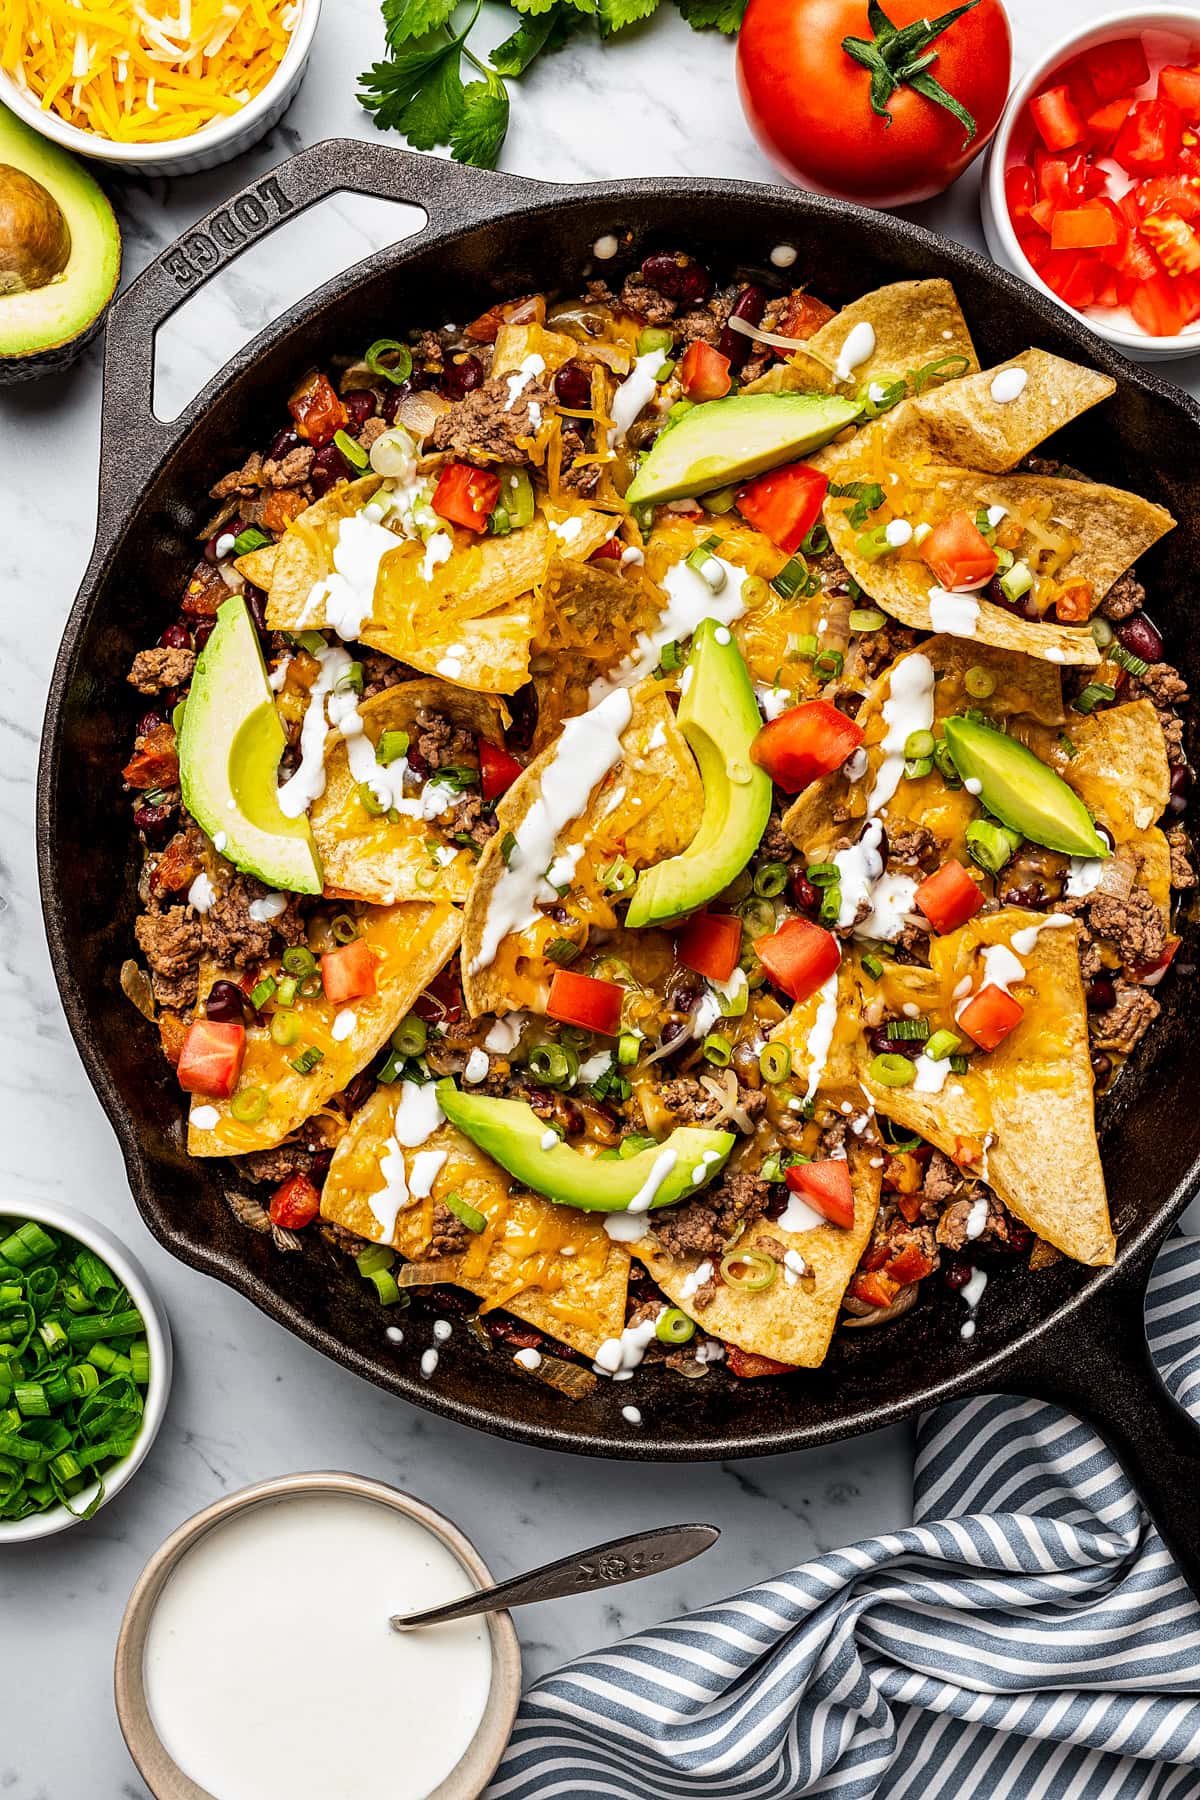 A skillet of cooked ground beef, tomatoes, cheese, and beans, and topped with tortilla chips.